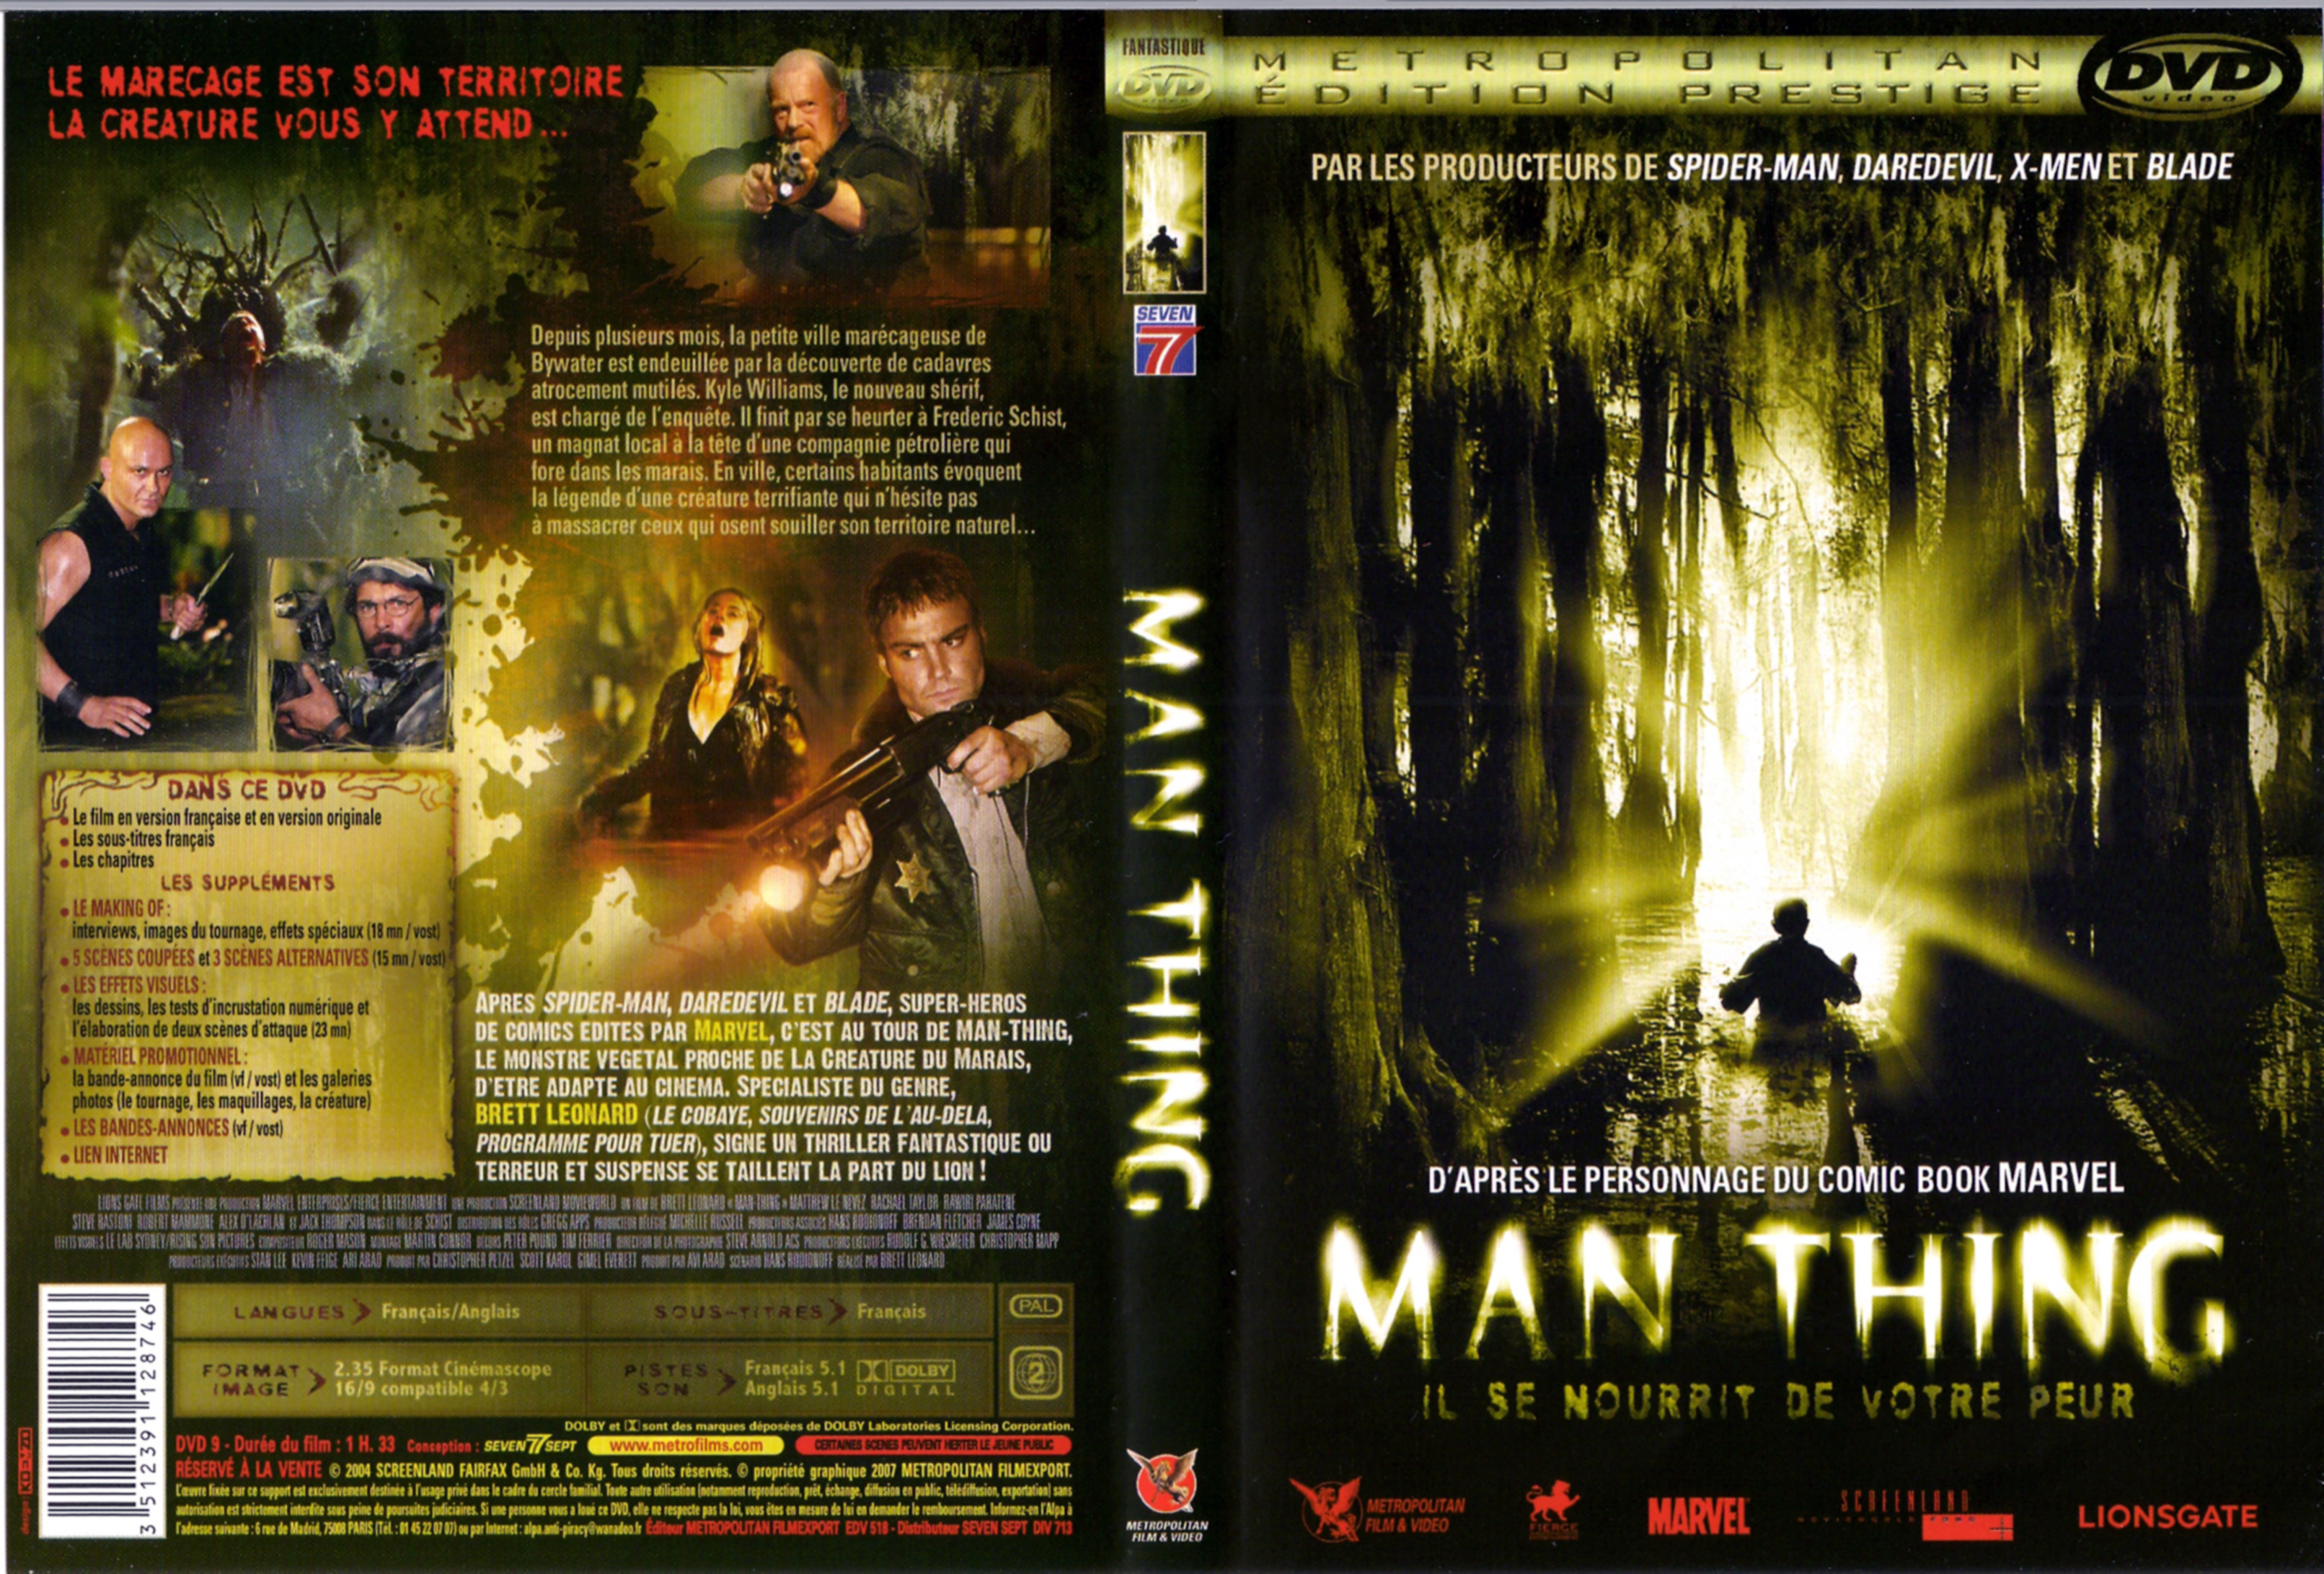 Jaquette DVD Man Thing